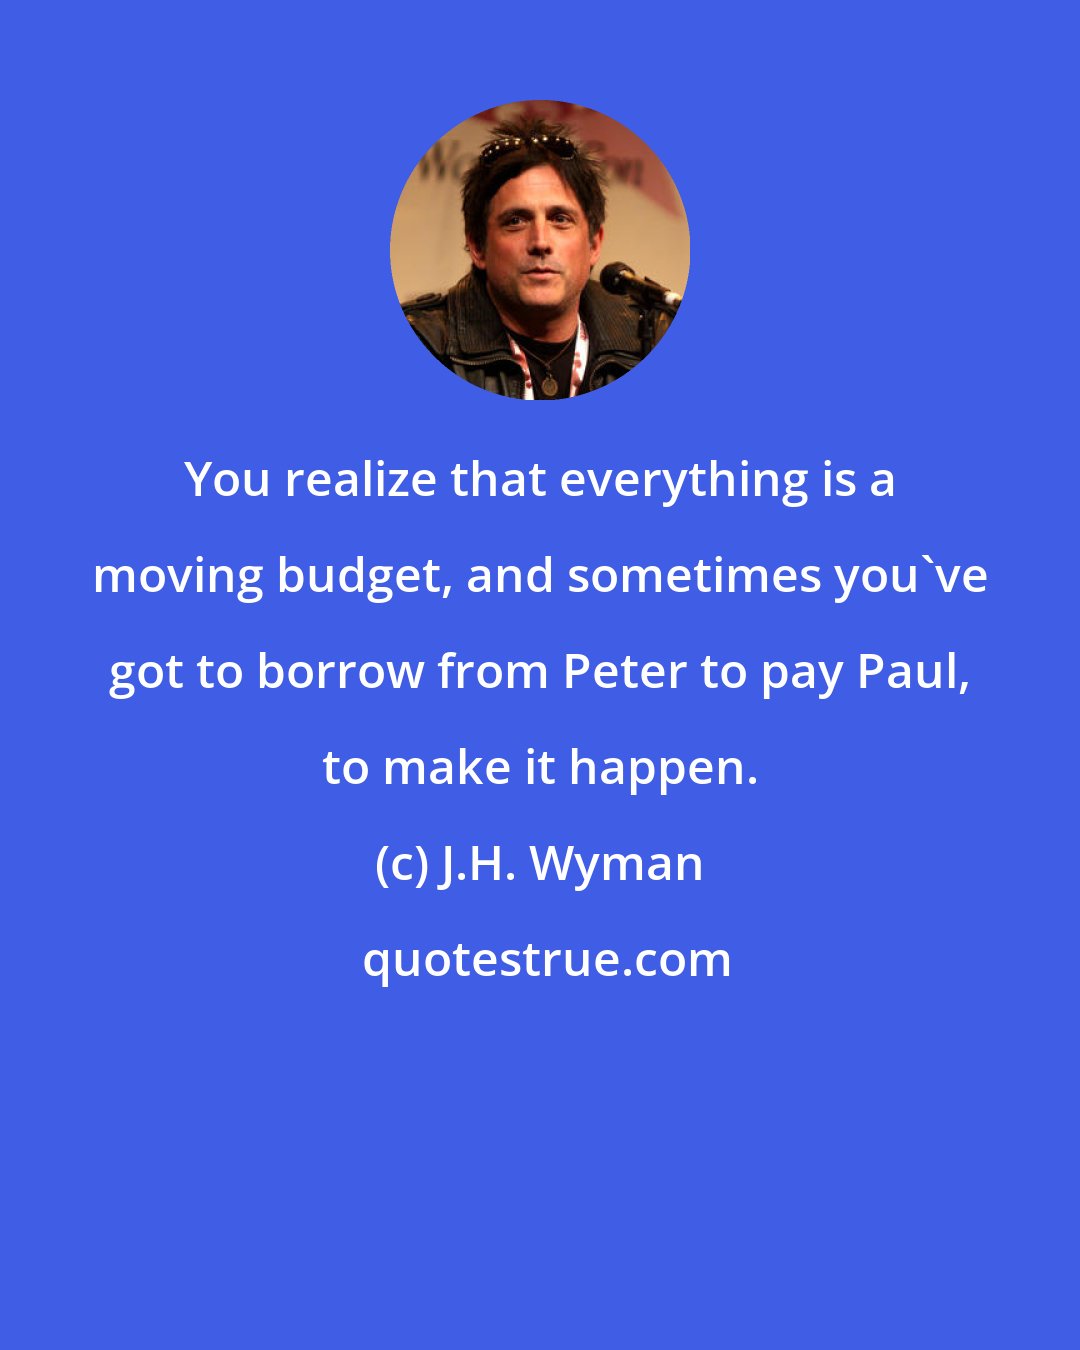 J.H. Wyman: You realize that everything is a moving budget, and sometimes you've got to borrow from Peter to pay Paul, to make it happen.